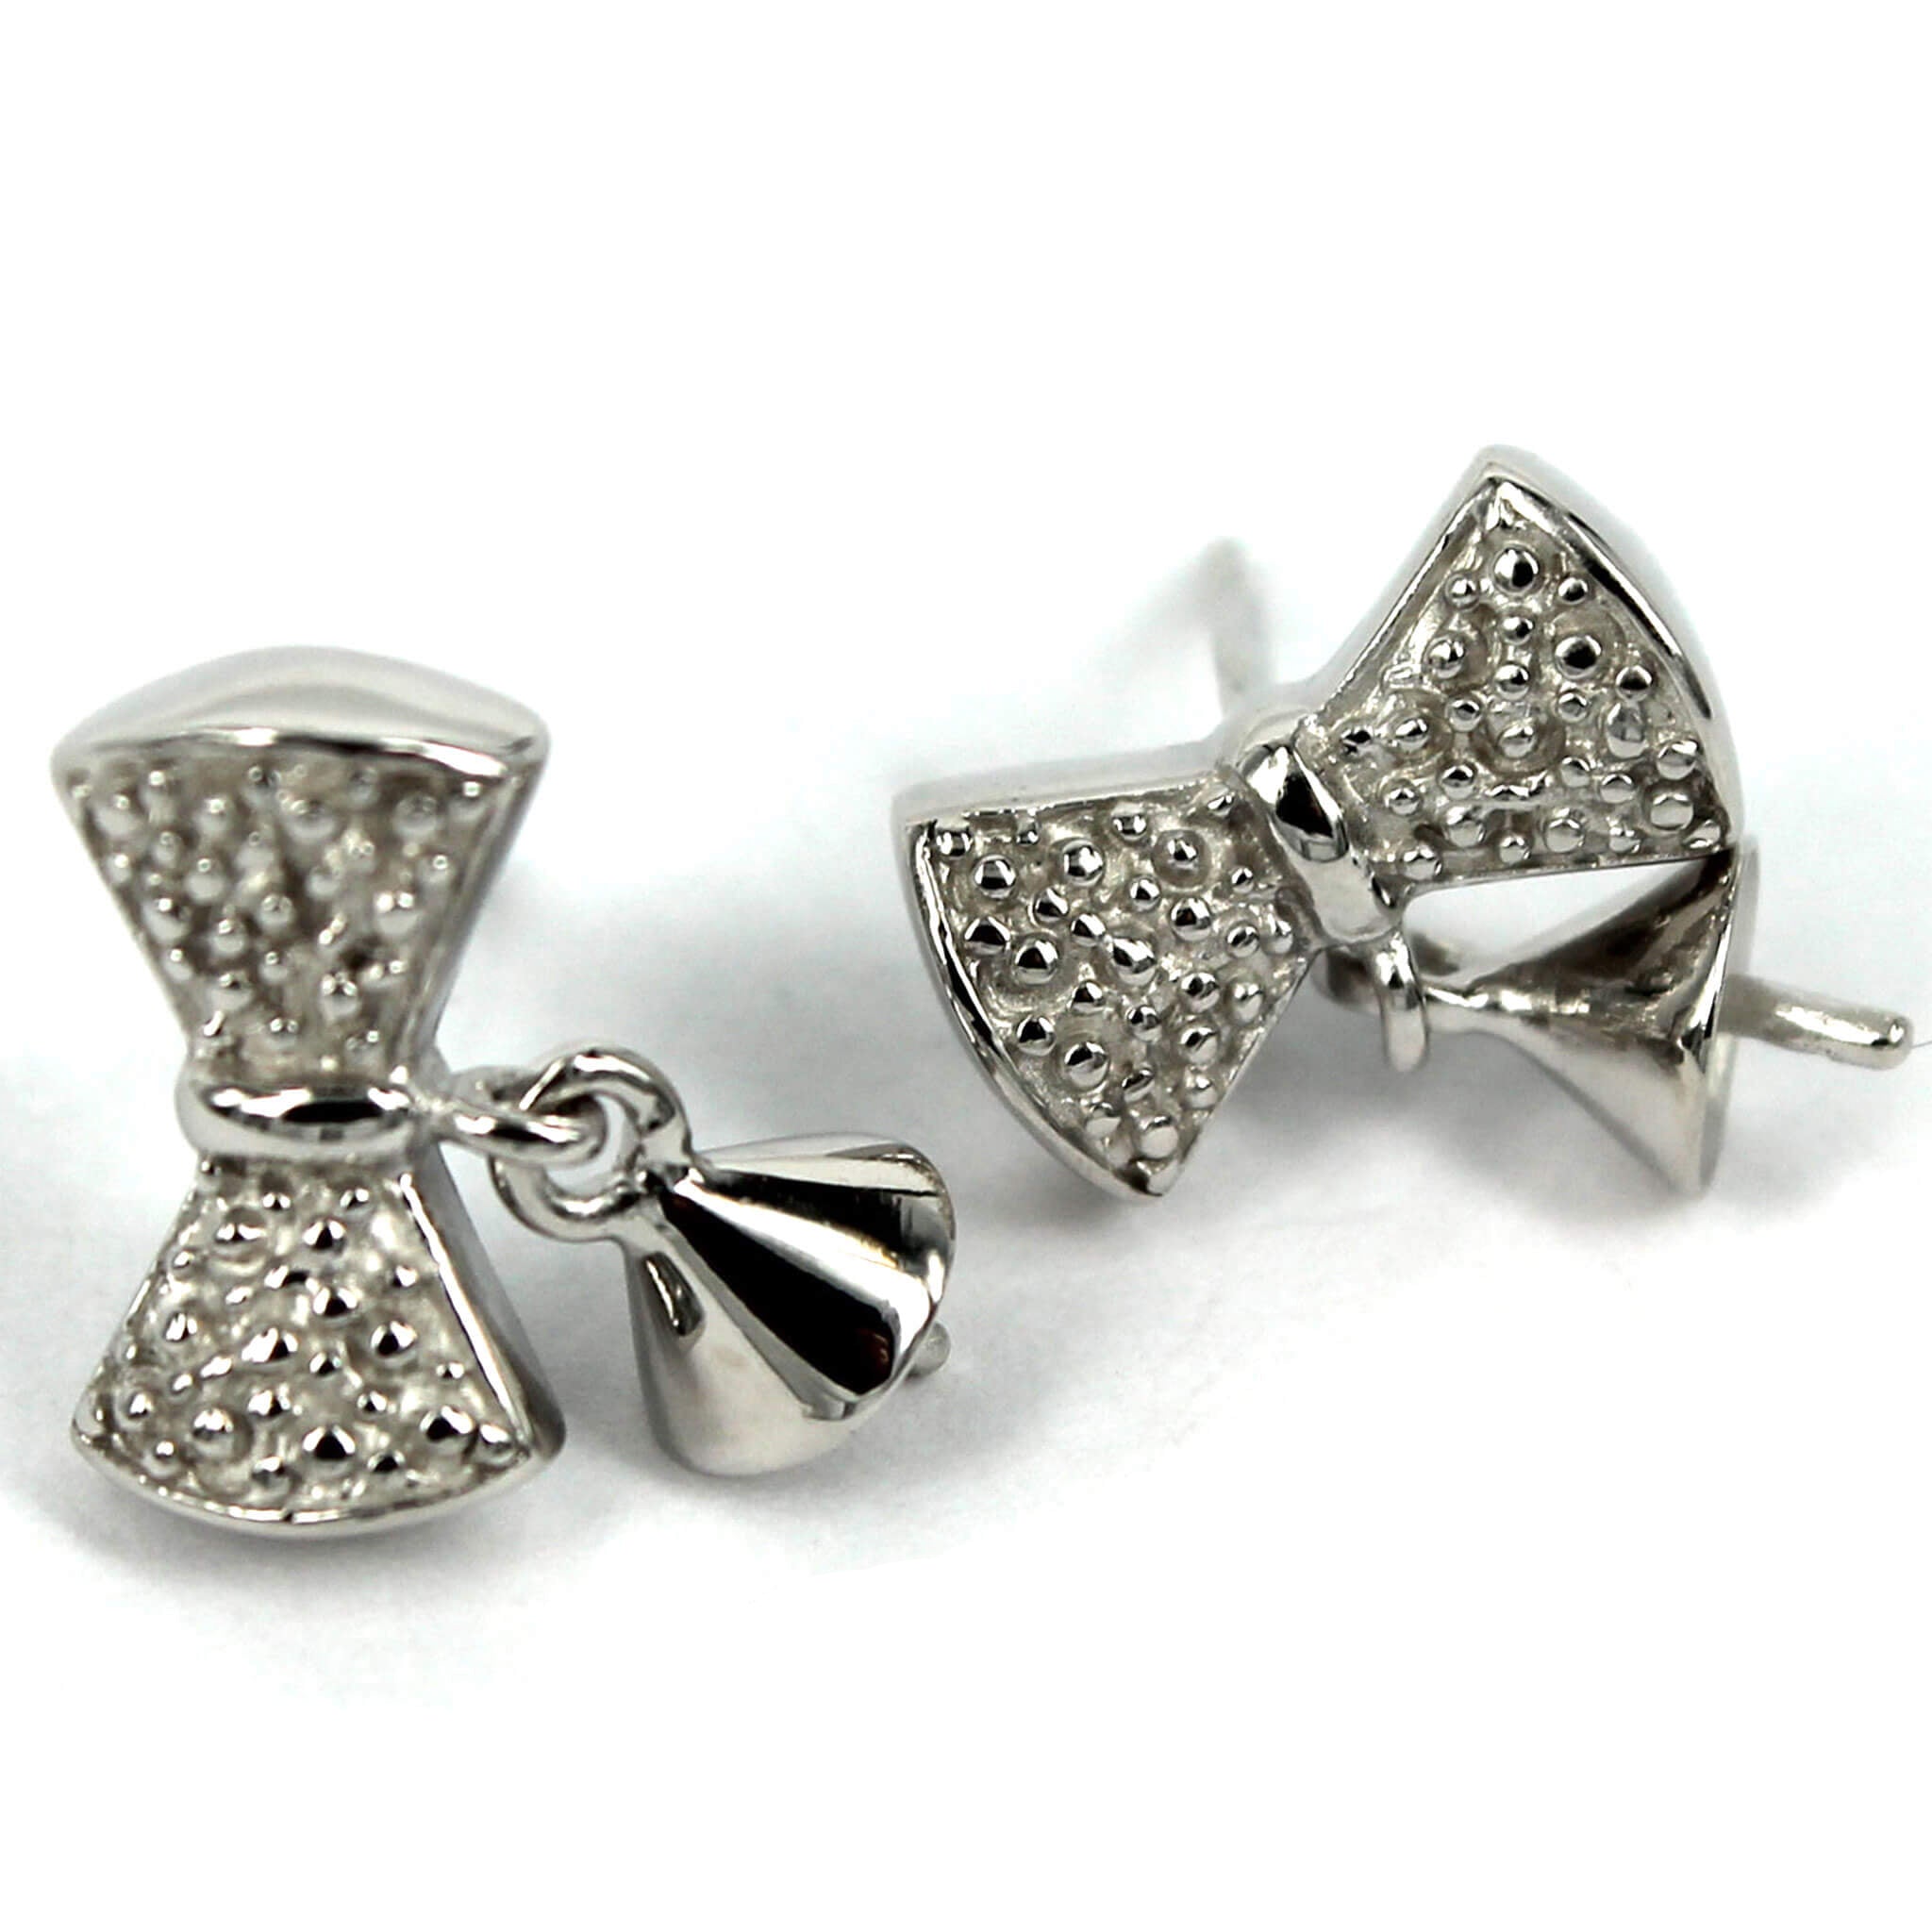 Bow Shape Ear Studs with Dangling Cup and Peg Mounting in Sterling Silver 4mm